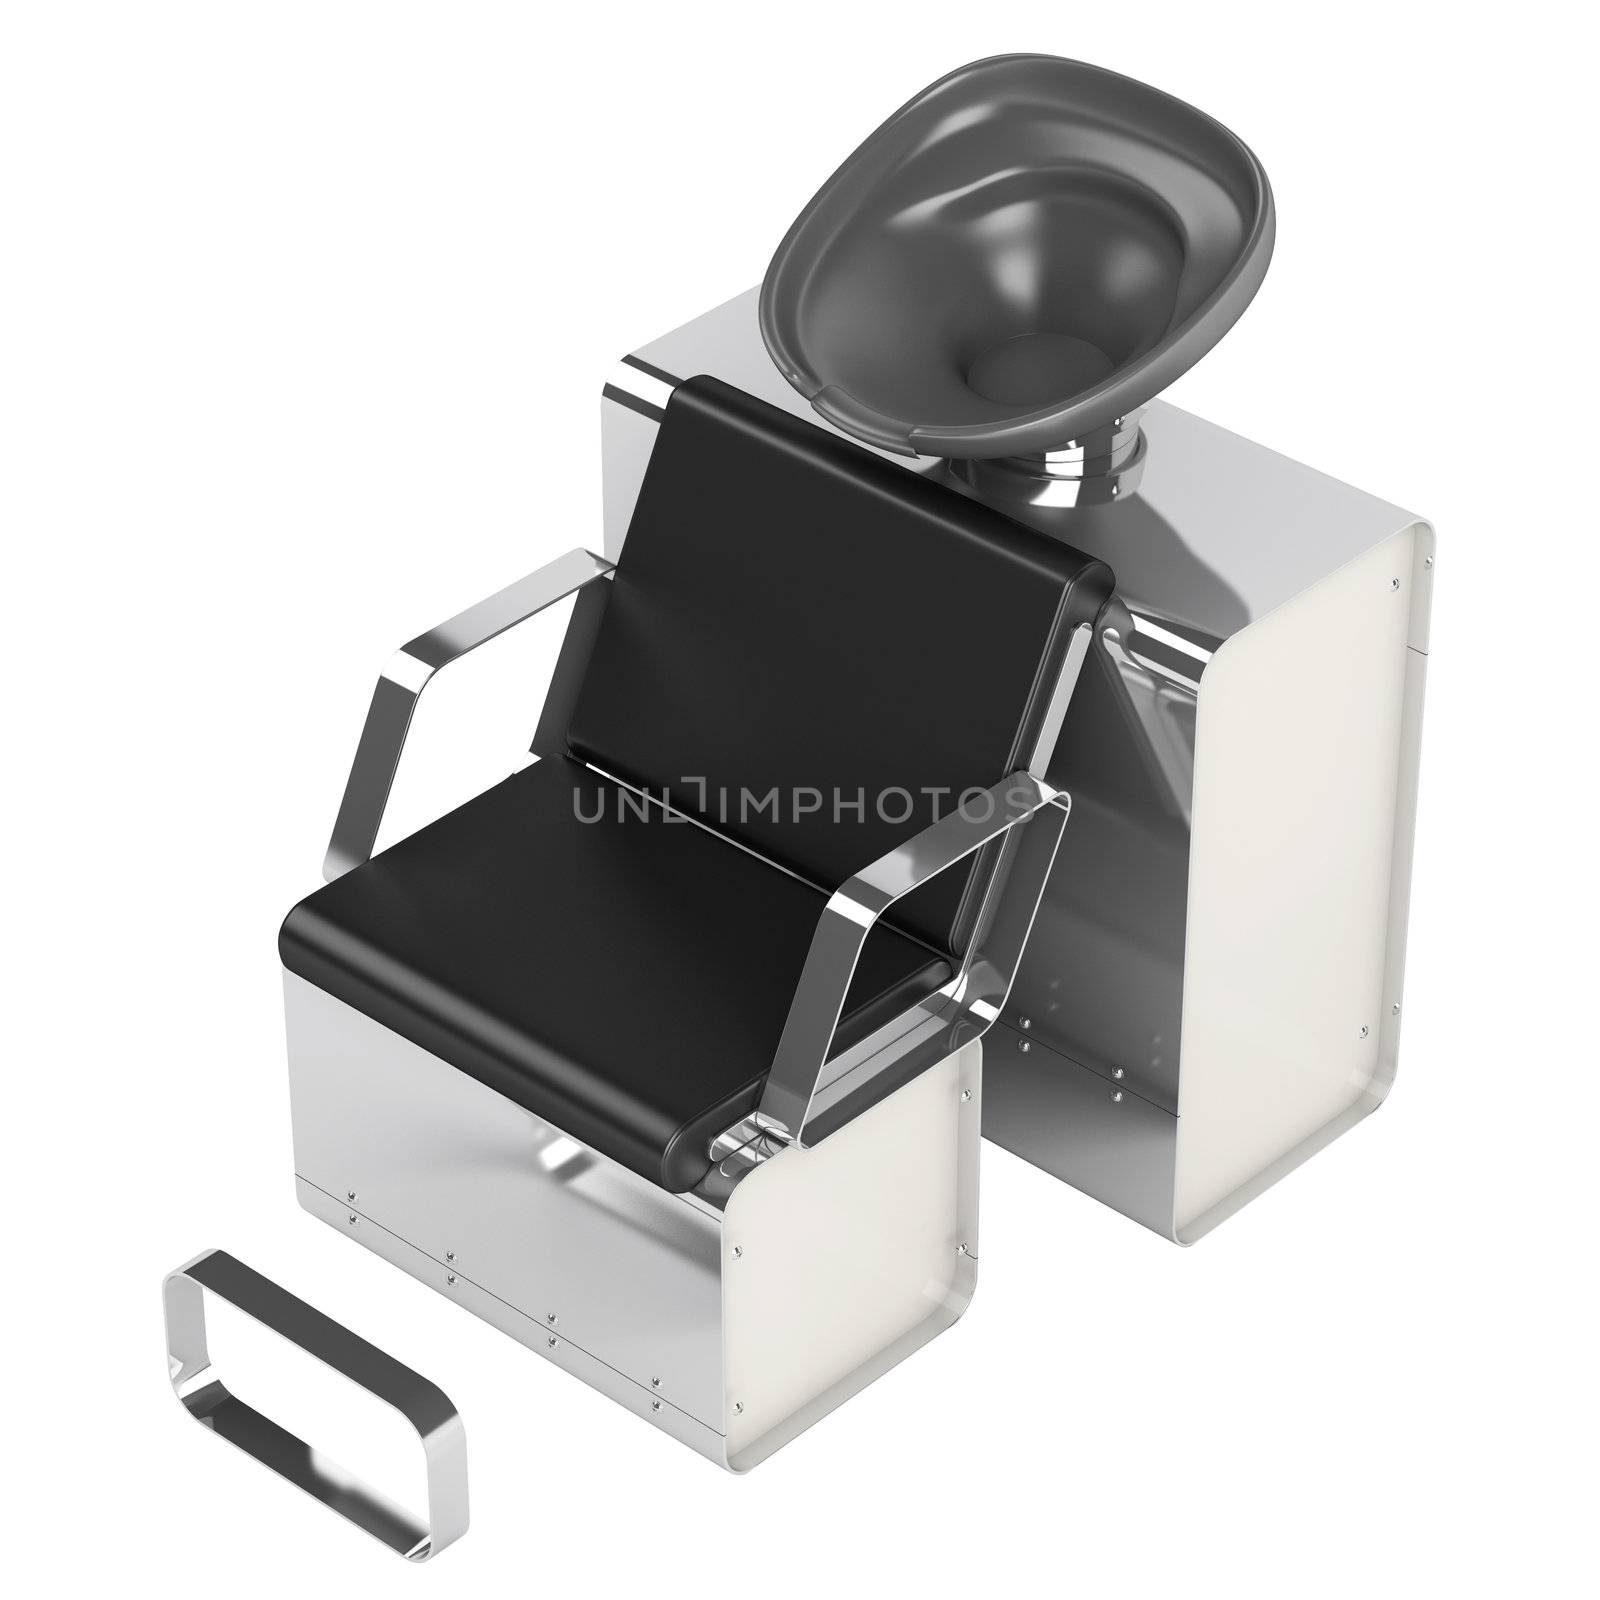 Black hair wash chair isolated on white background